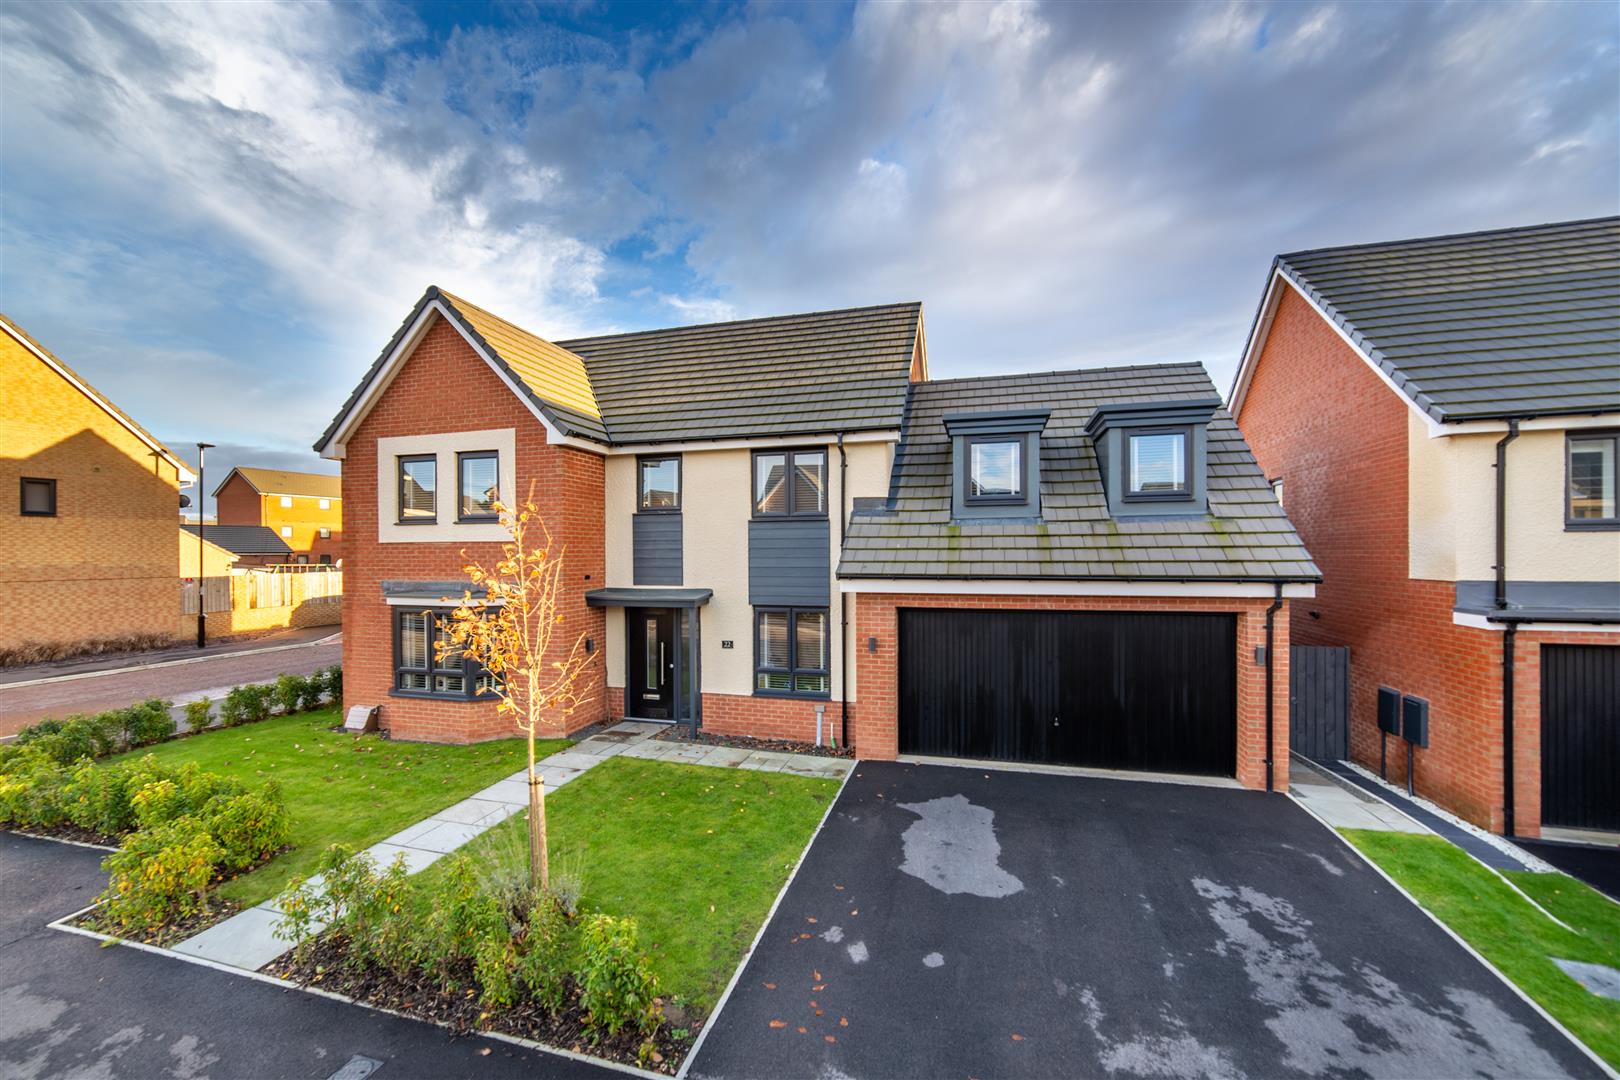 4 bed detached house for sale in Whiteadmiral Place, Great Park, NE13